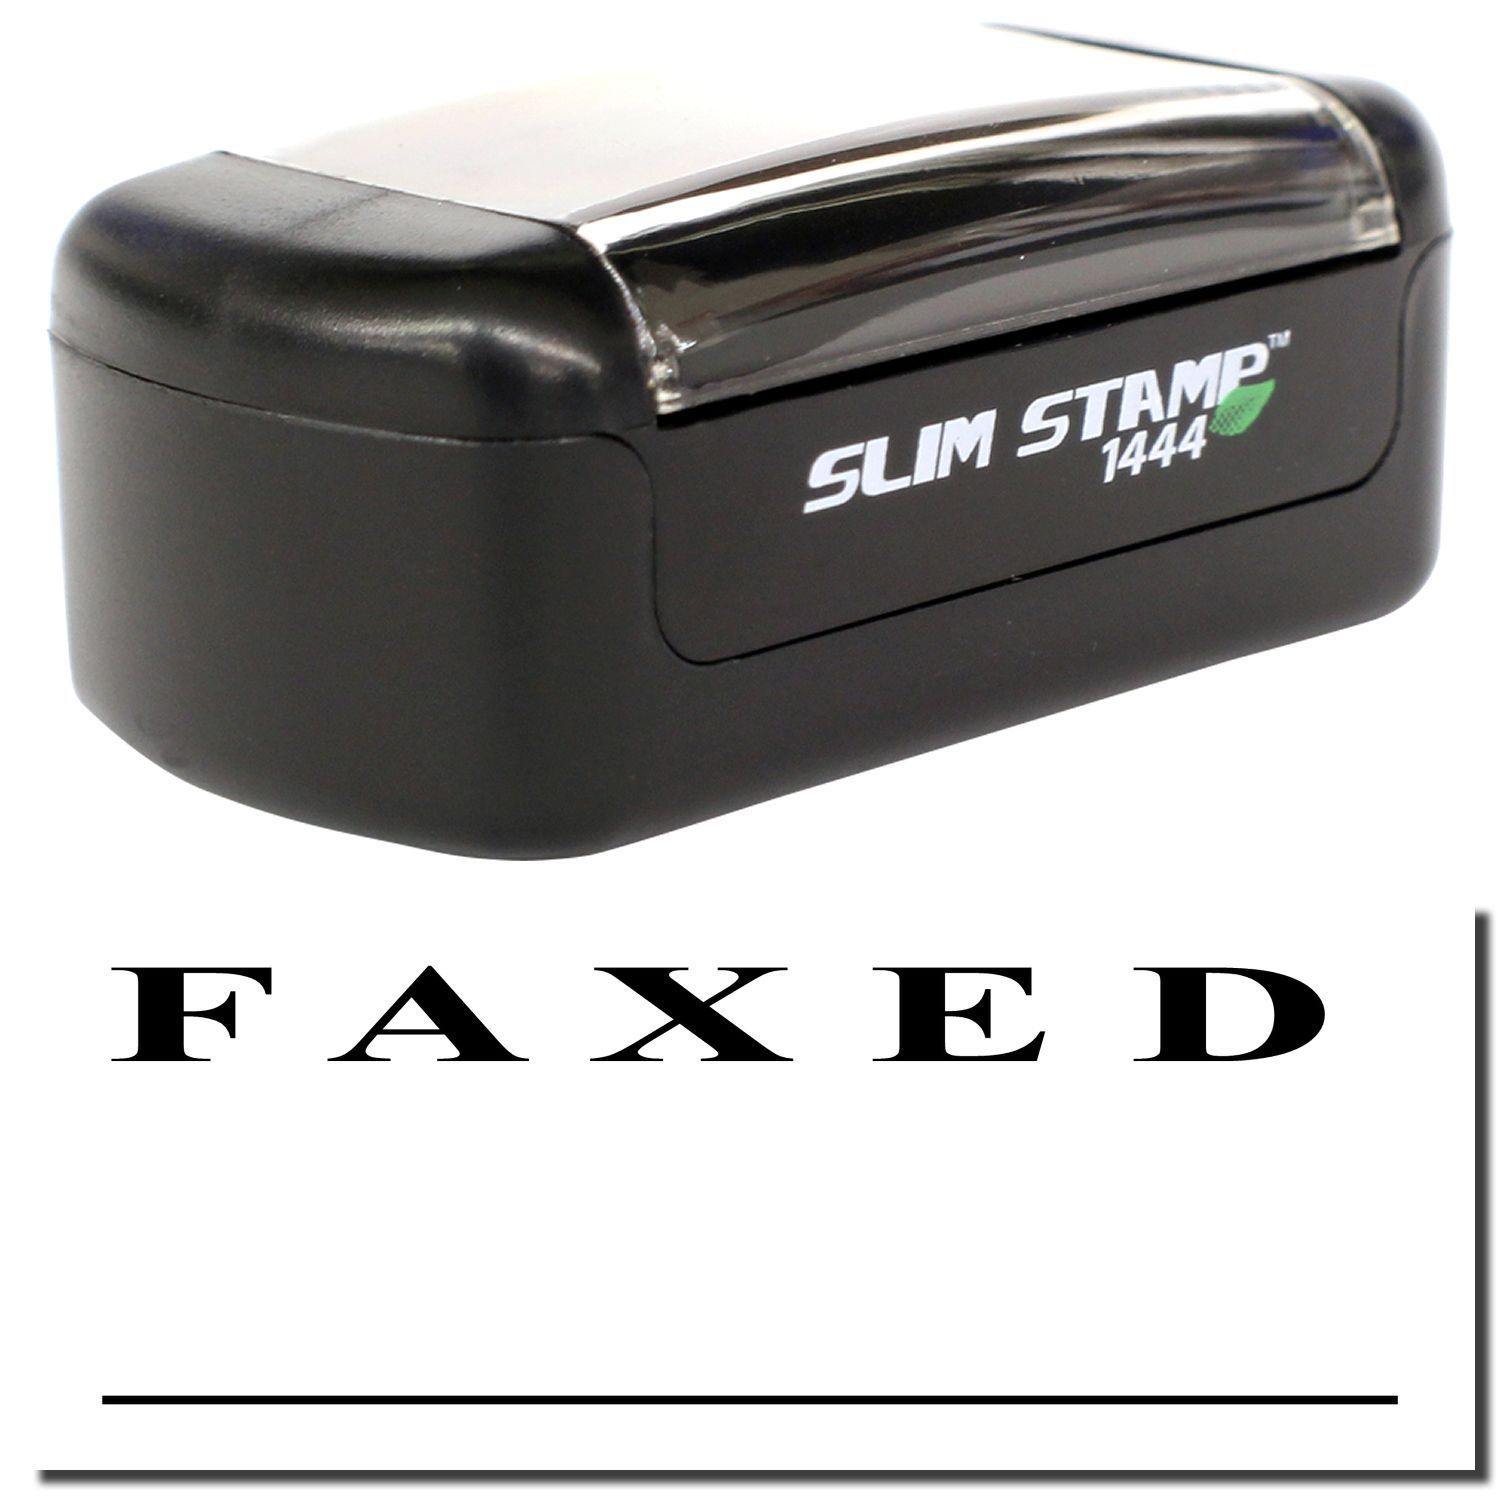 A stock office pre-inked stamp with a stamped image showing how the text "FAXED" with a line underneath the text is displayed after stamping.